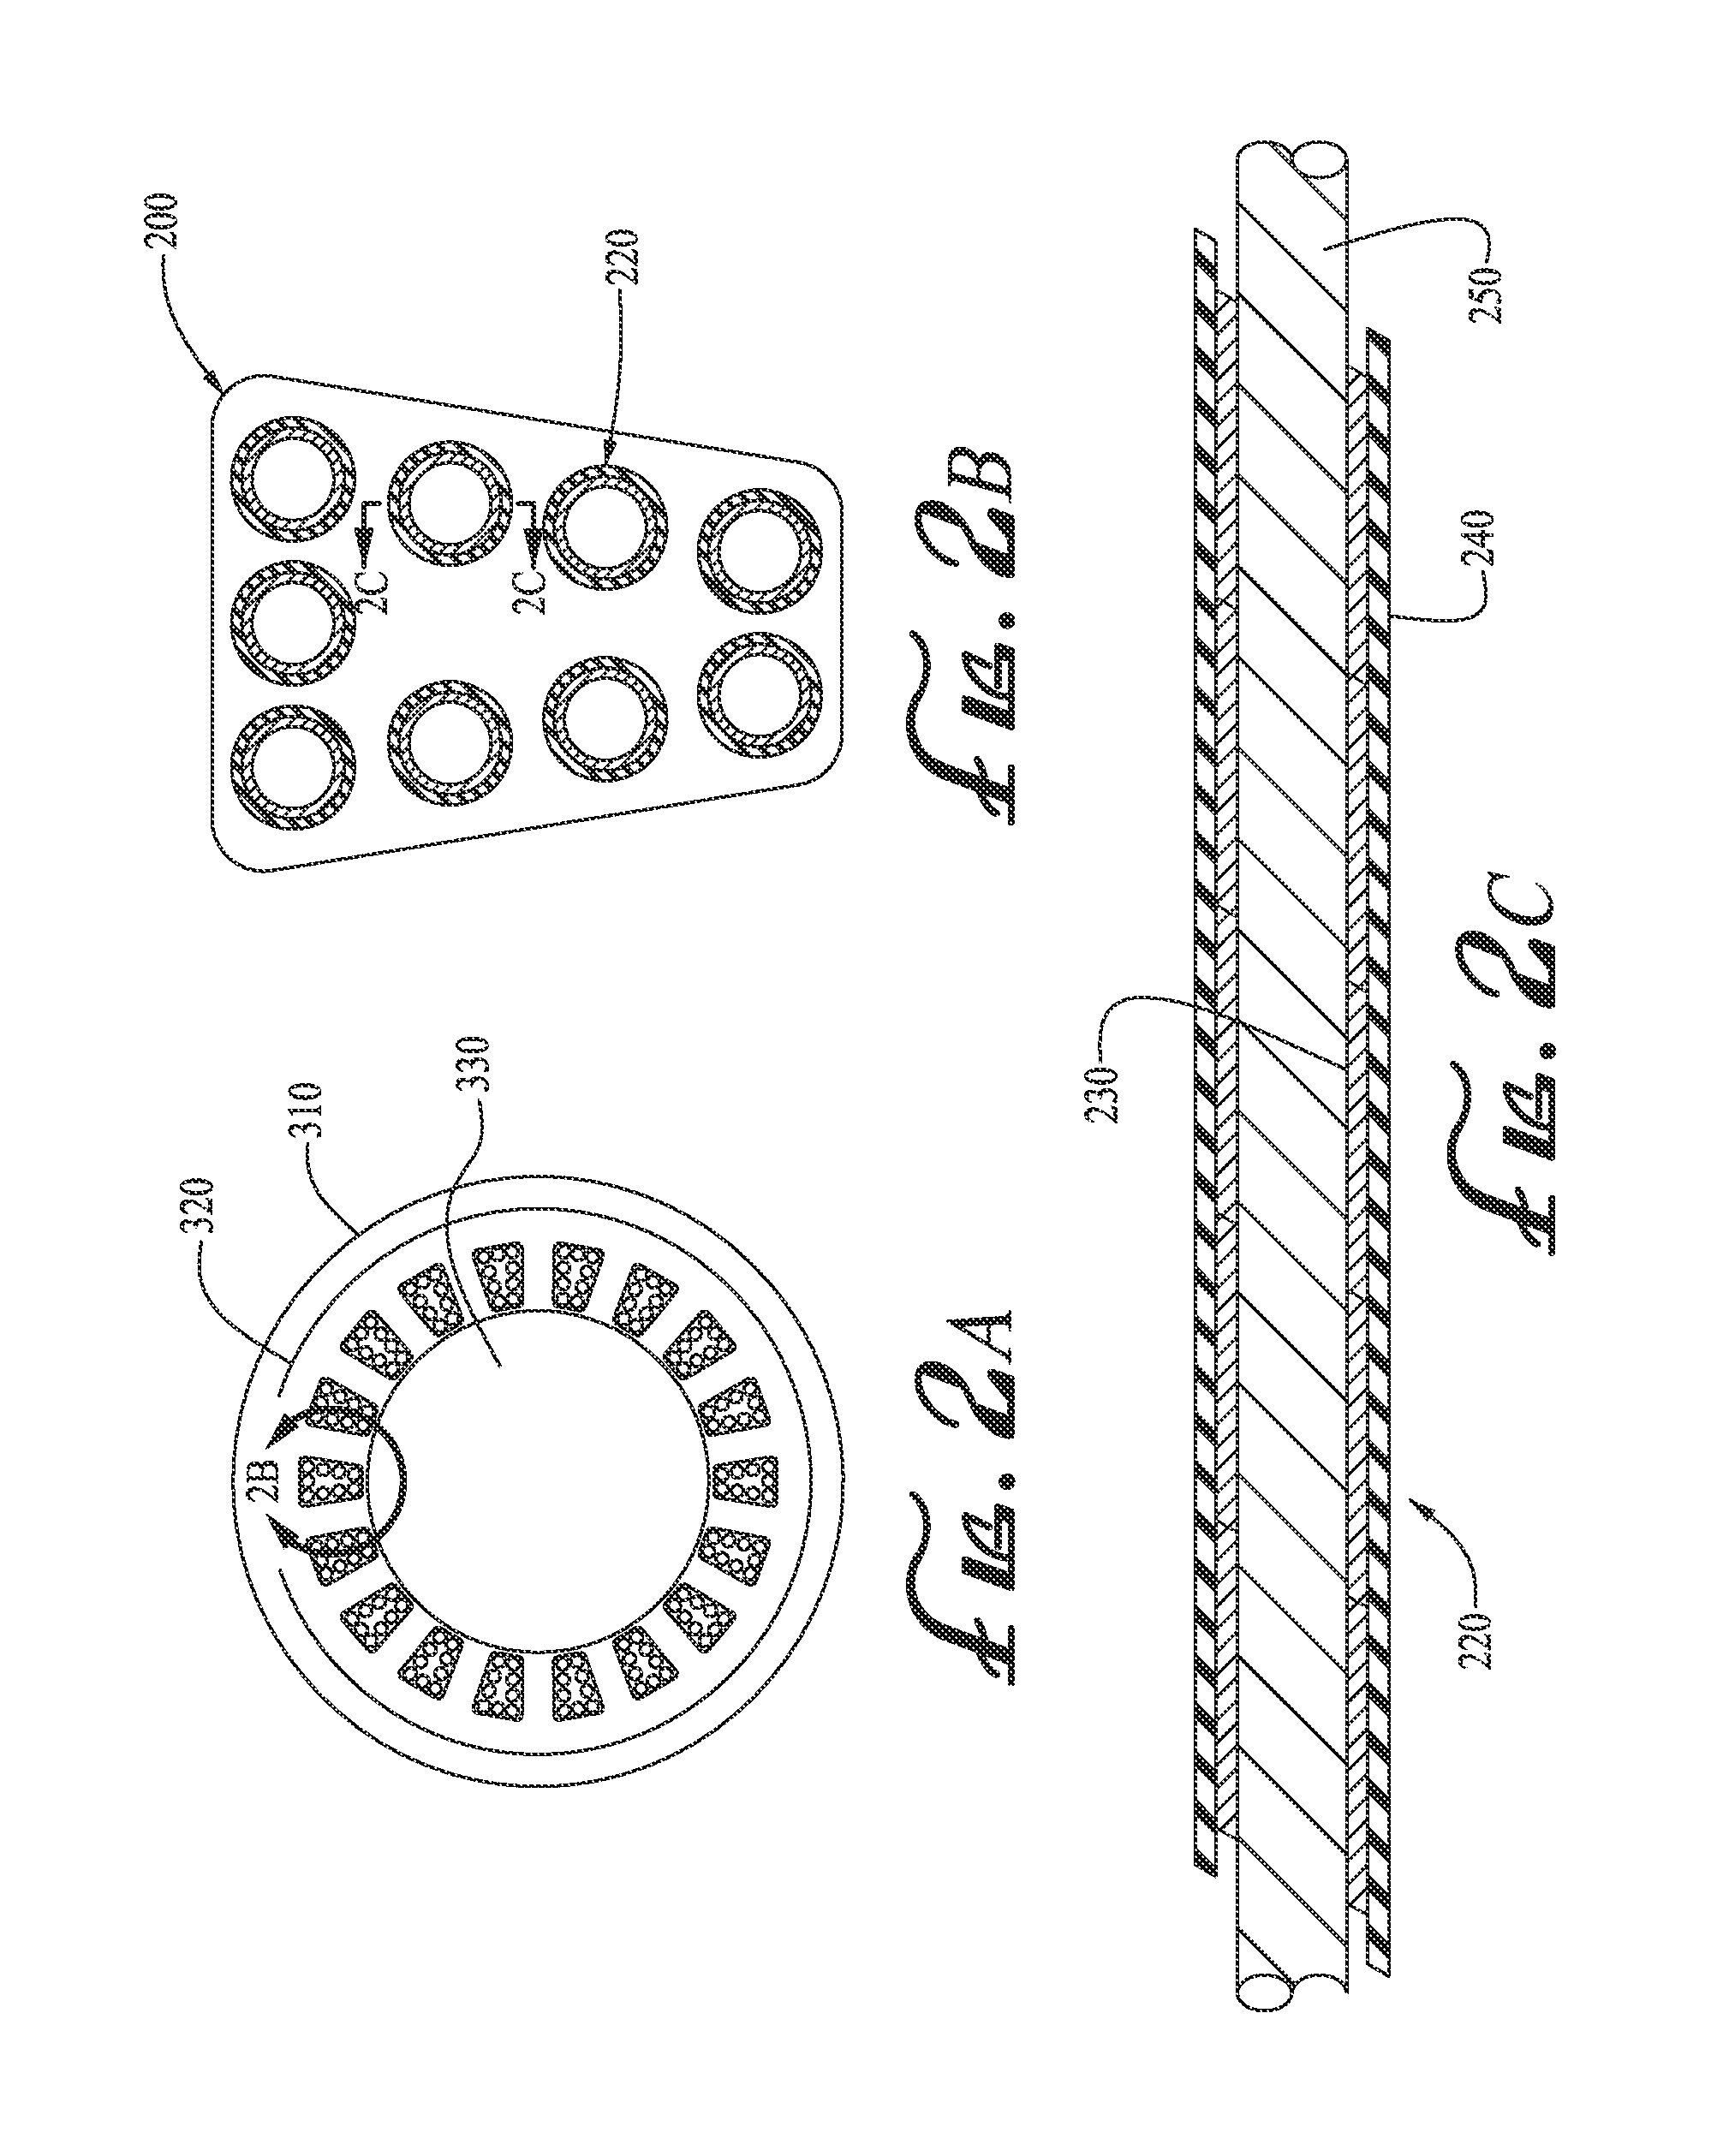 System and method for enhanced magnet wire insulation